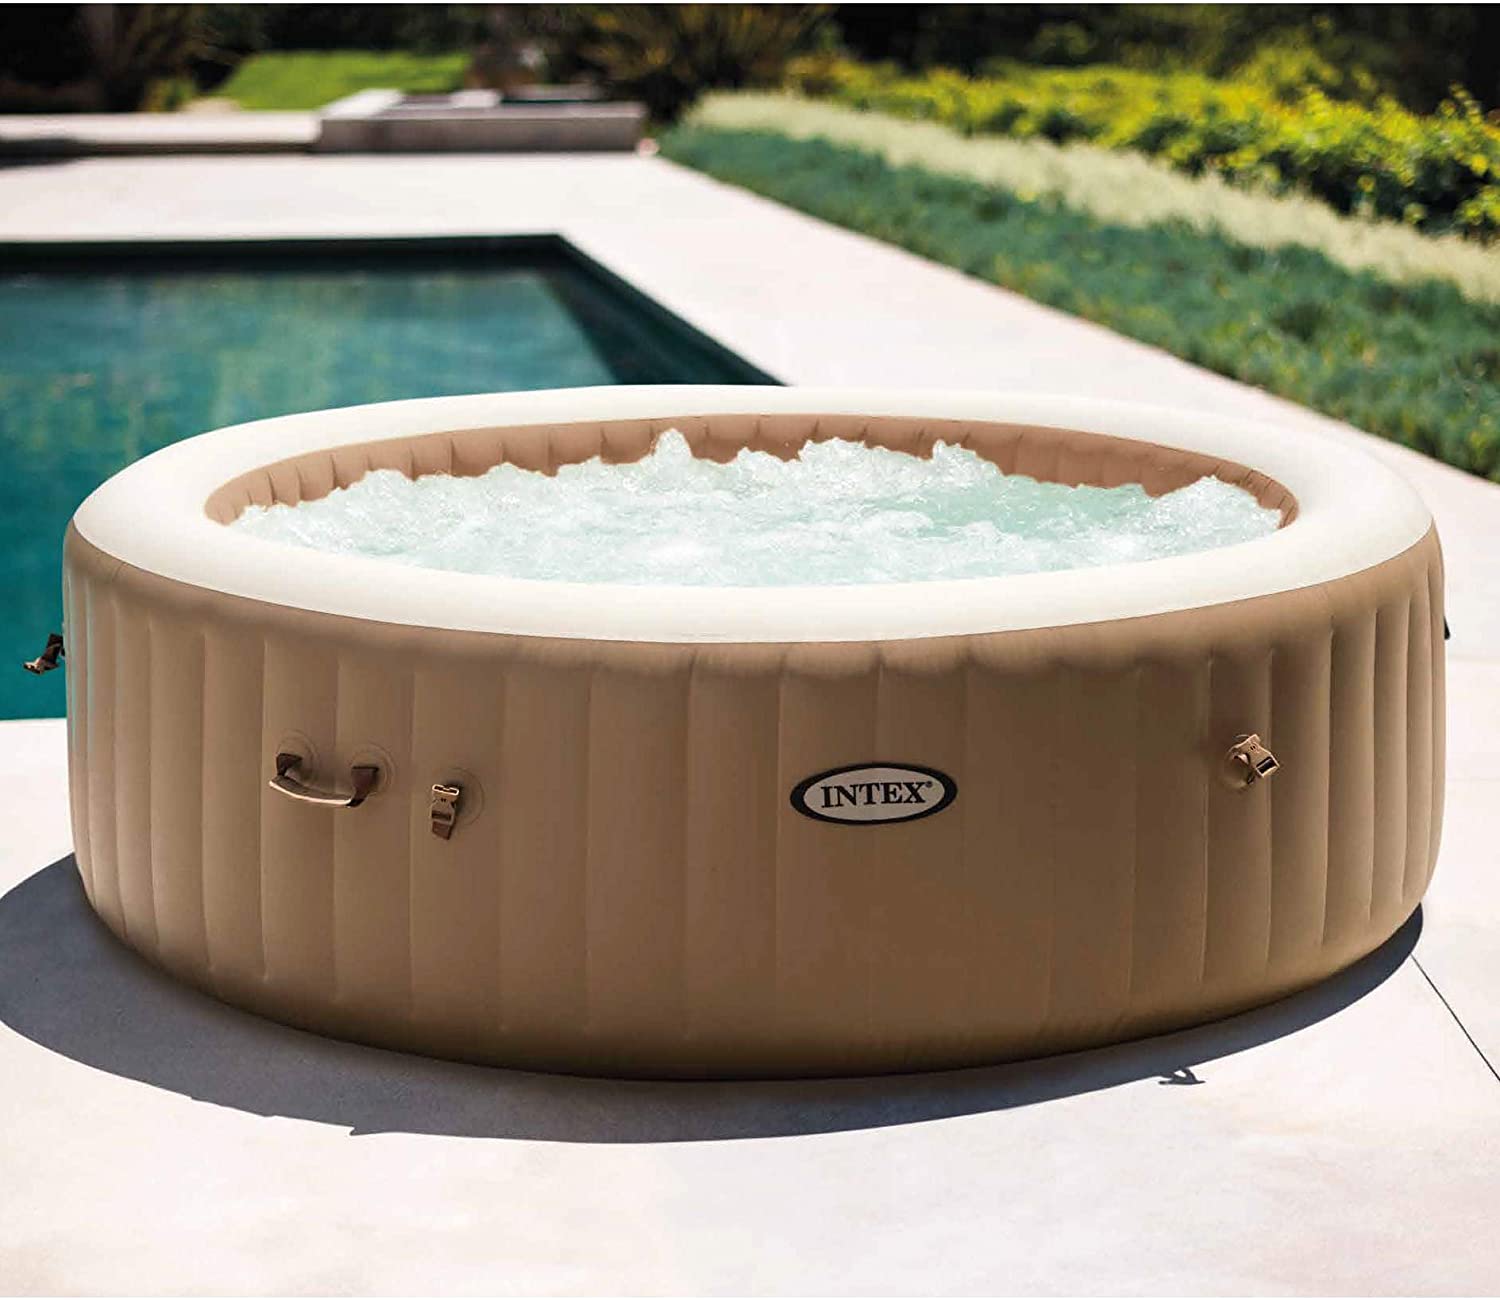 Review of Intex 28427E 85in PureSpa Inflatable Spa, 6-Person